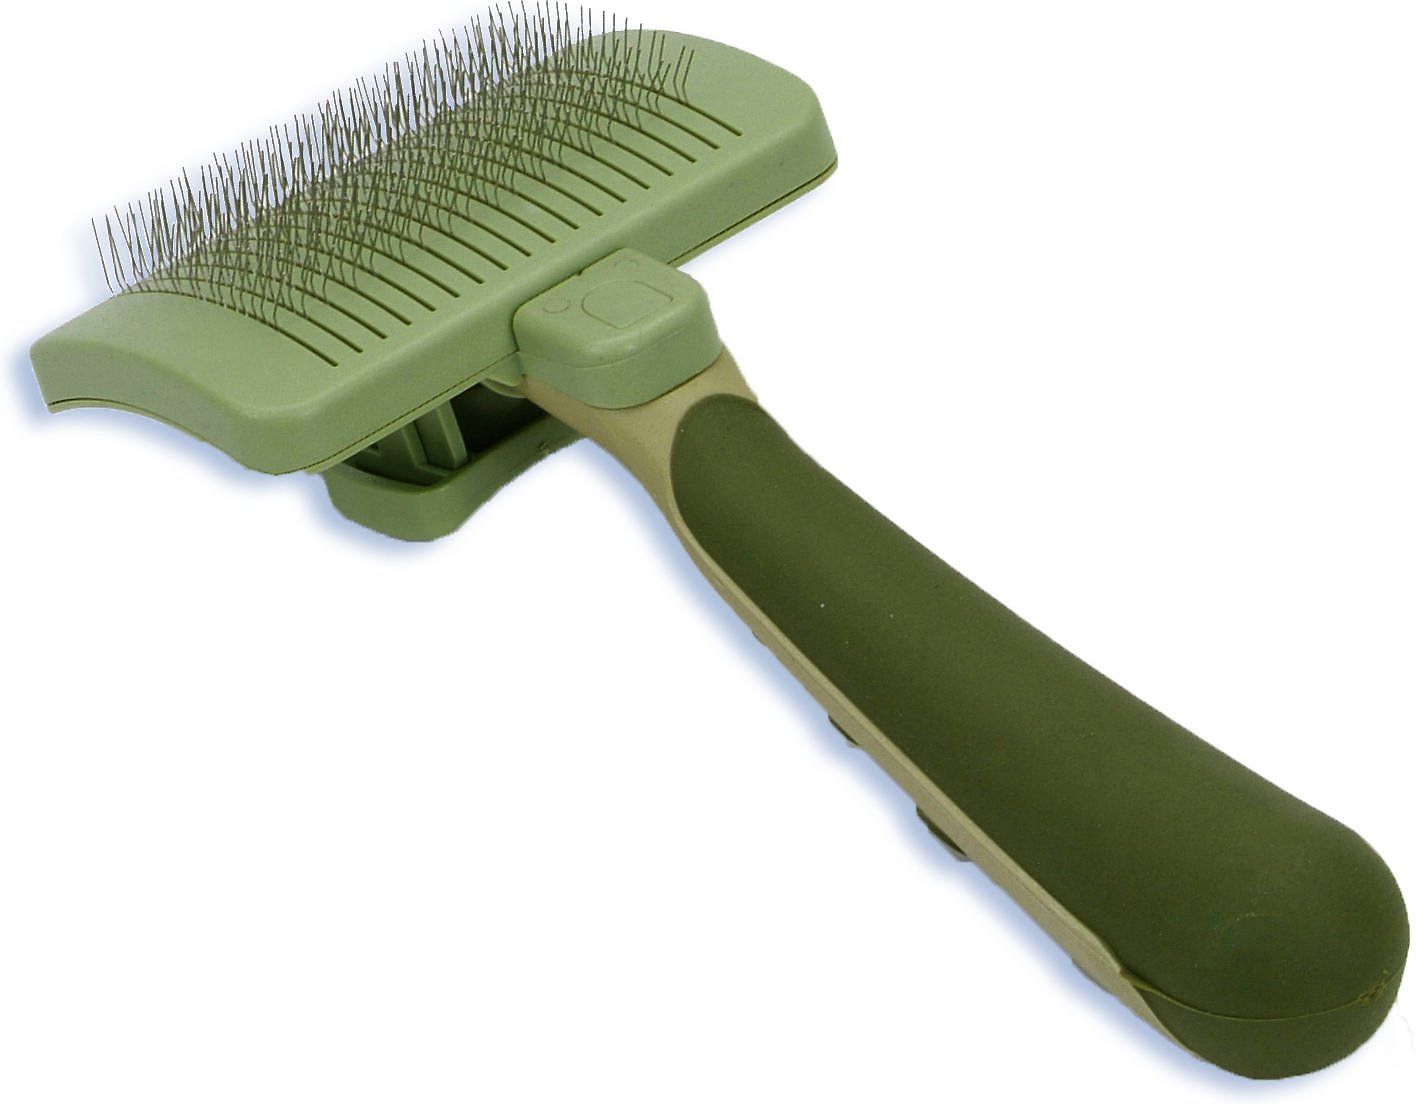 Self-Cleaning Slicker Brush for Dogs